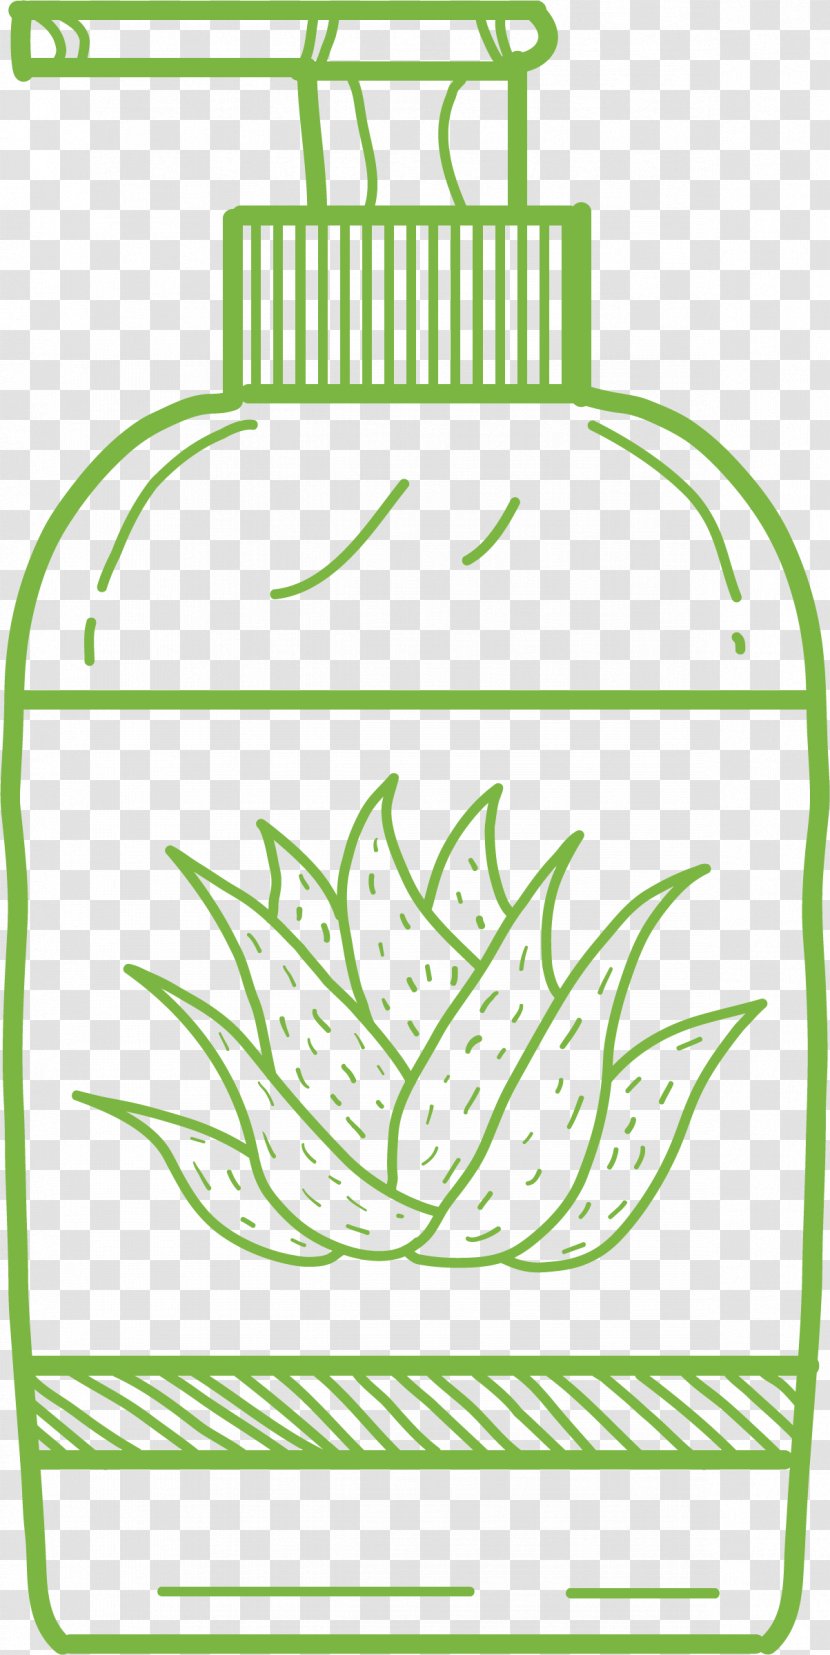 Hand Washing Soap - Line Art - Hand-painted Aloe Sanitizer Transparent PNG